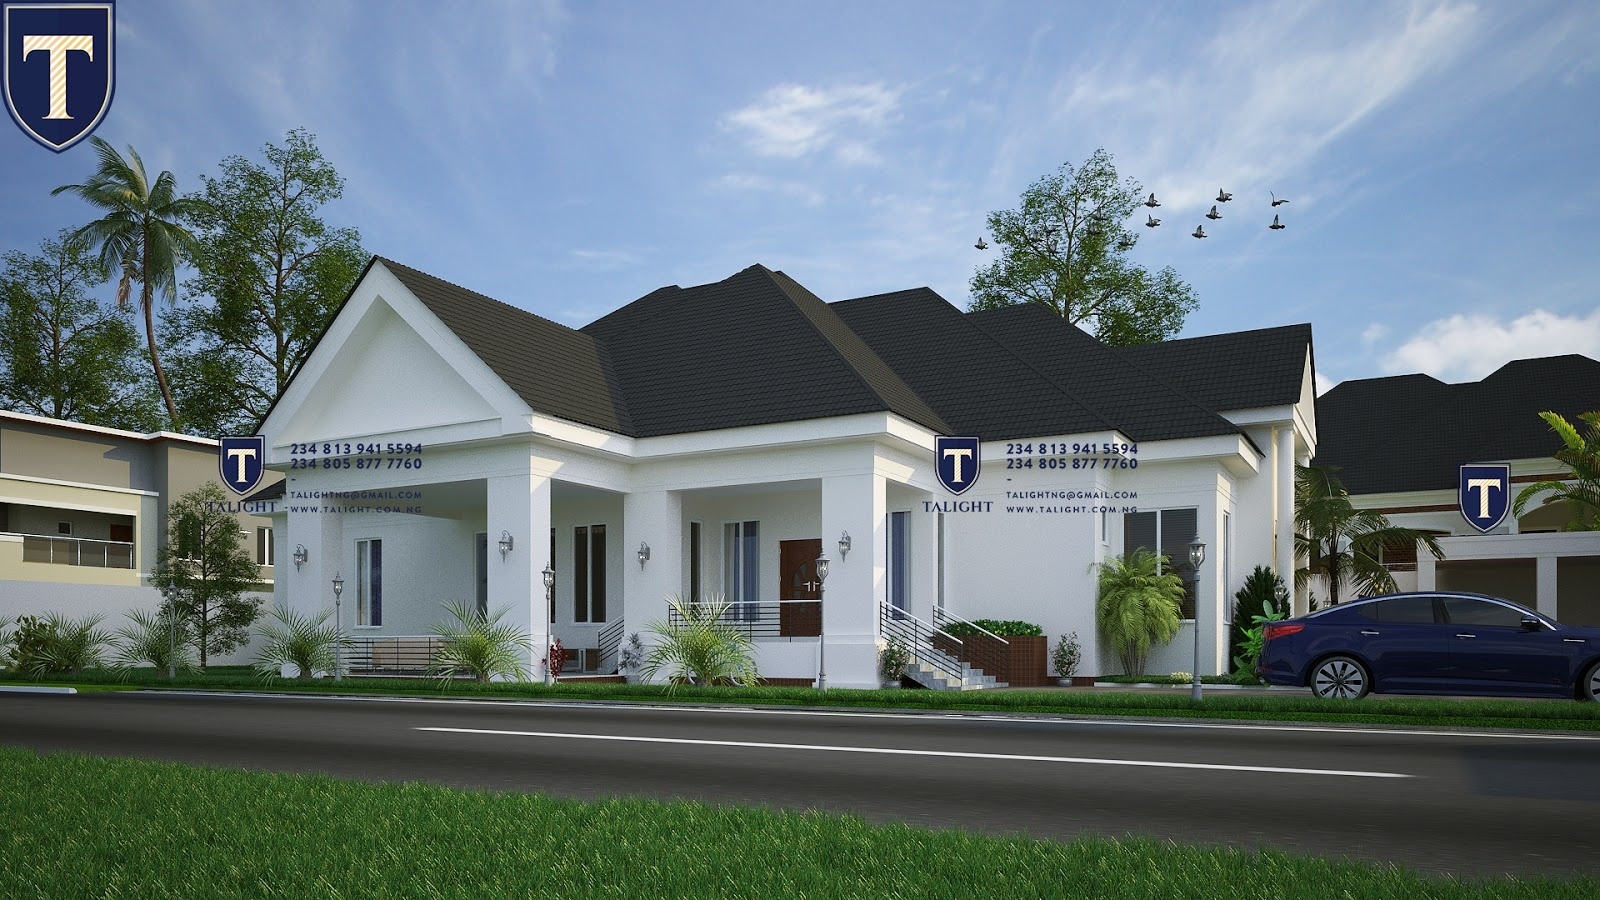 Picture of five bedroom bungalow plan in nigeria intended for astonishing building plans 5 bedroom in nigeria